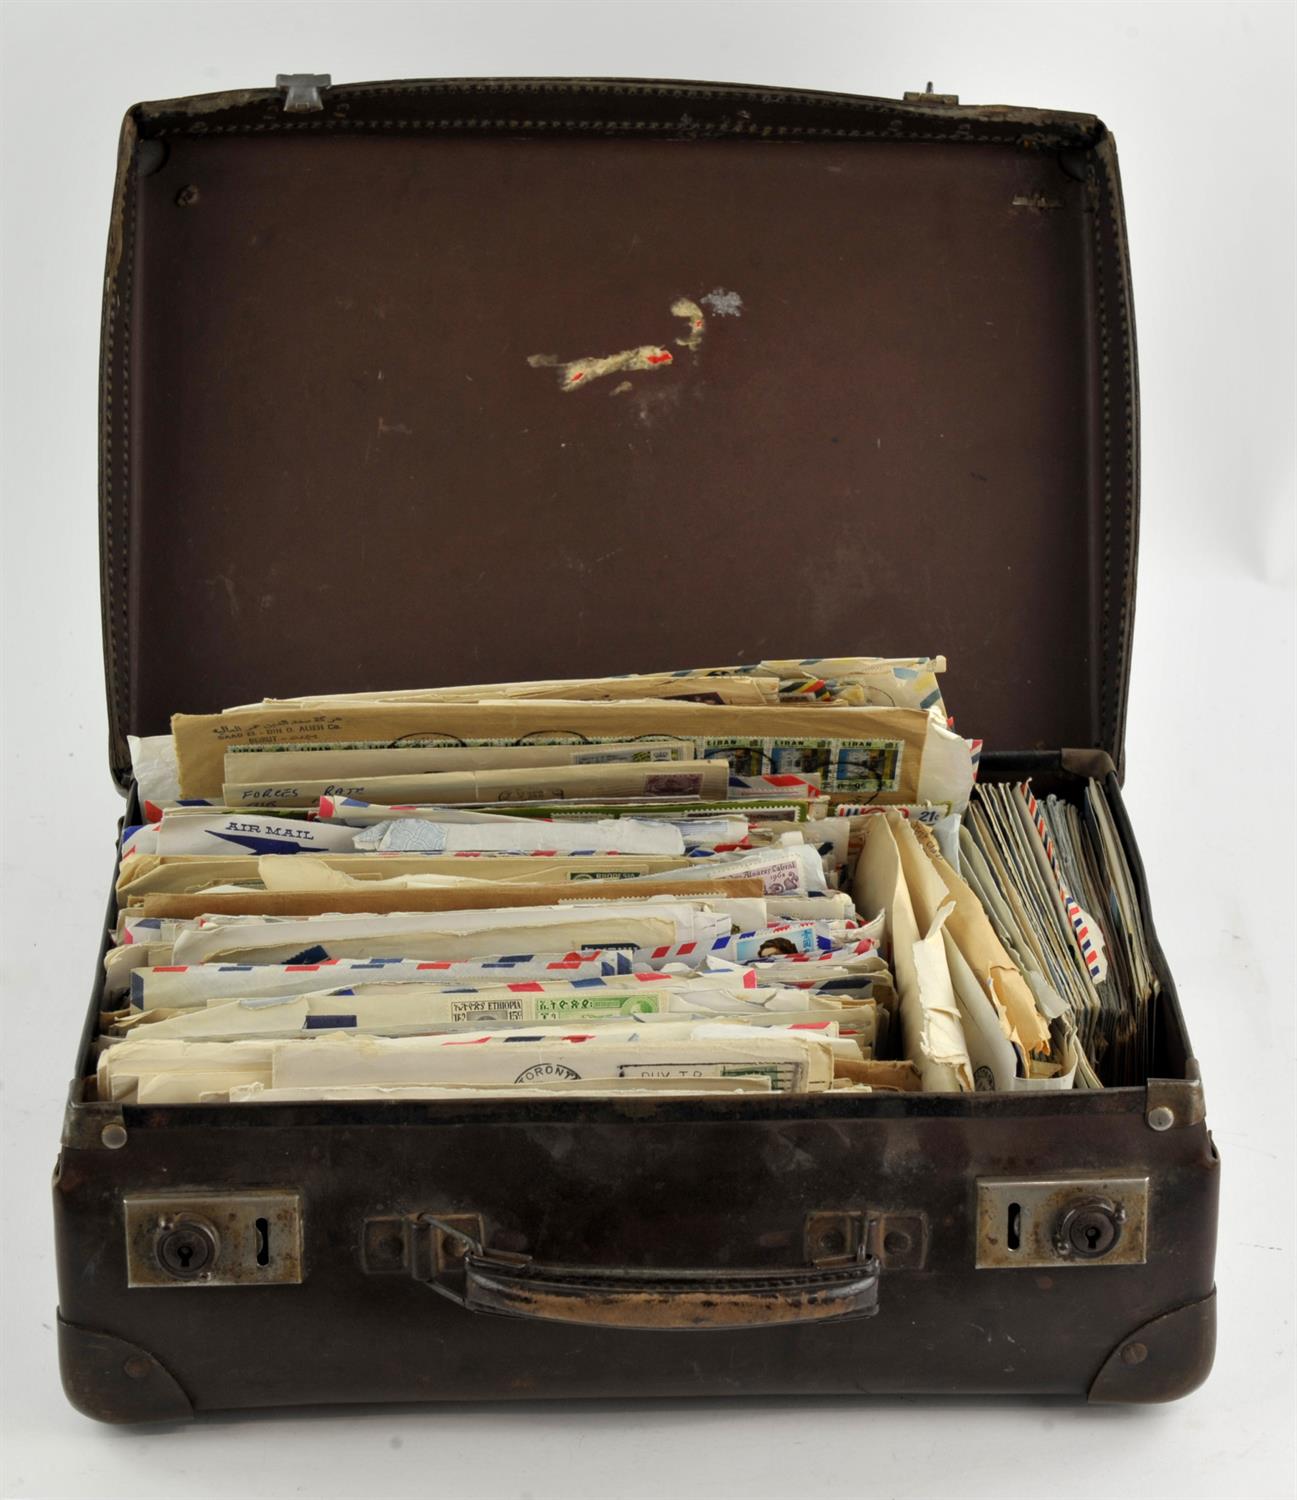 Small brown suitcase containing stamps on envelopes including Australia and Canada.